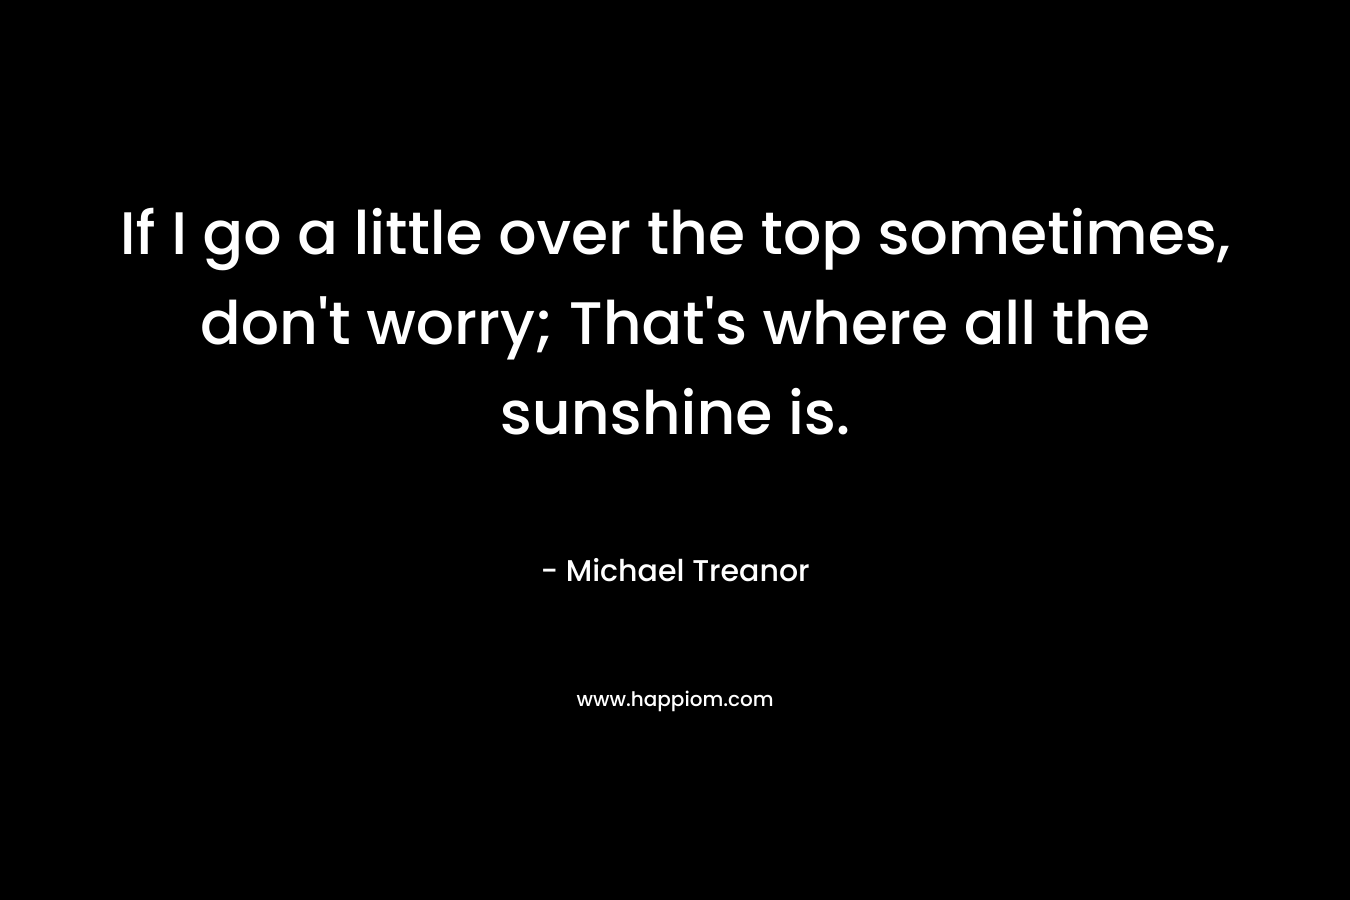 If I go a little over the top sometimes, don’t worry; That’s where all the sunshine is. – Michael Treanor